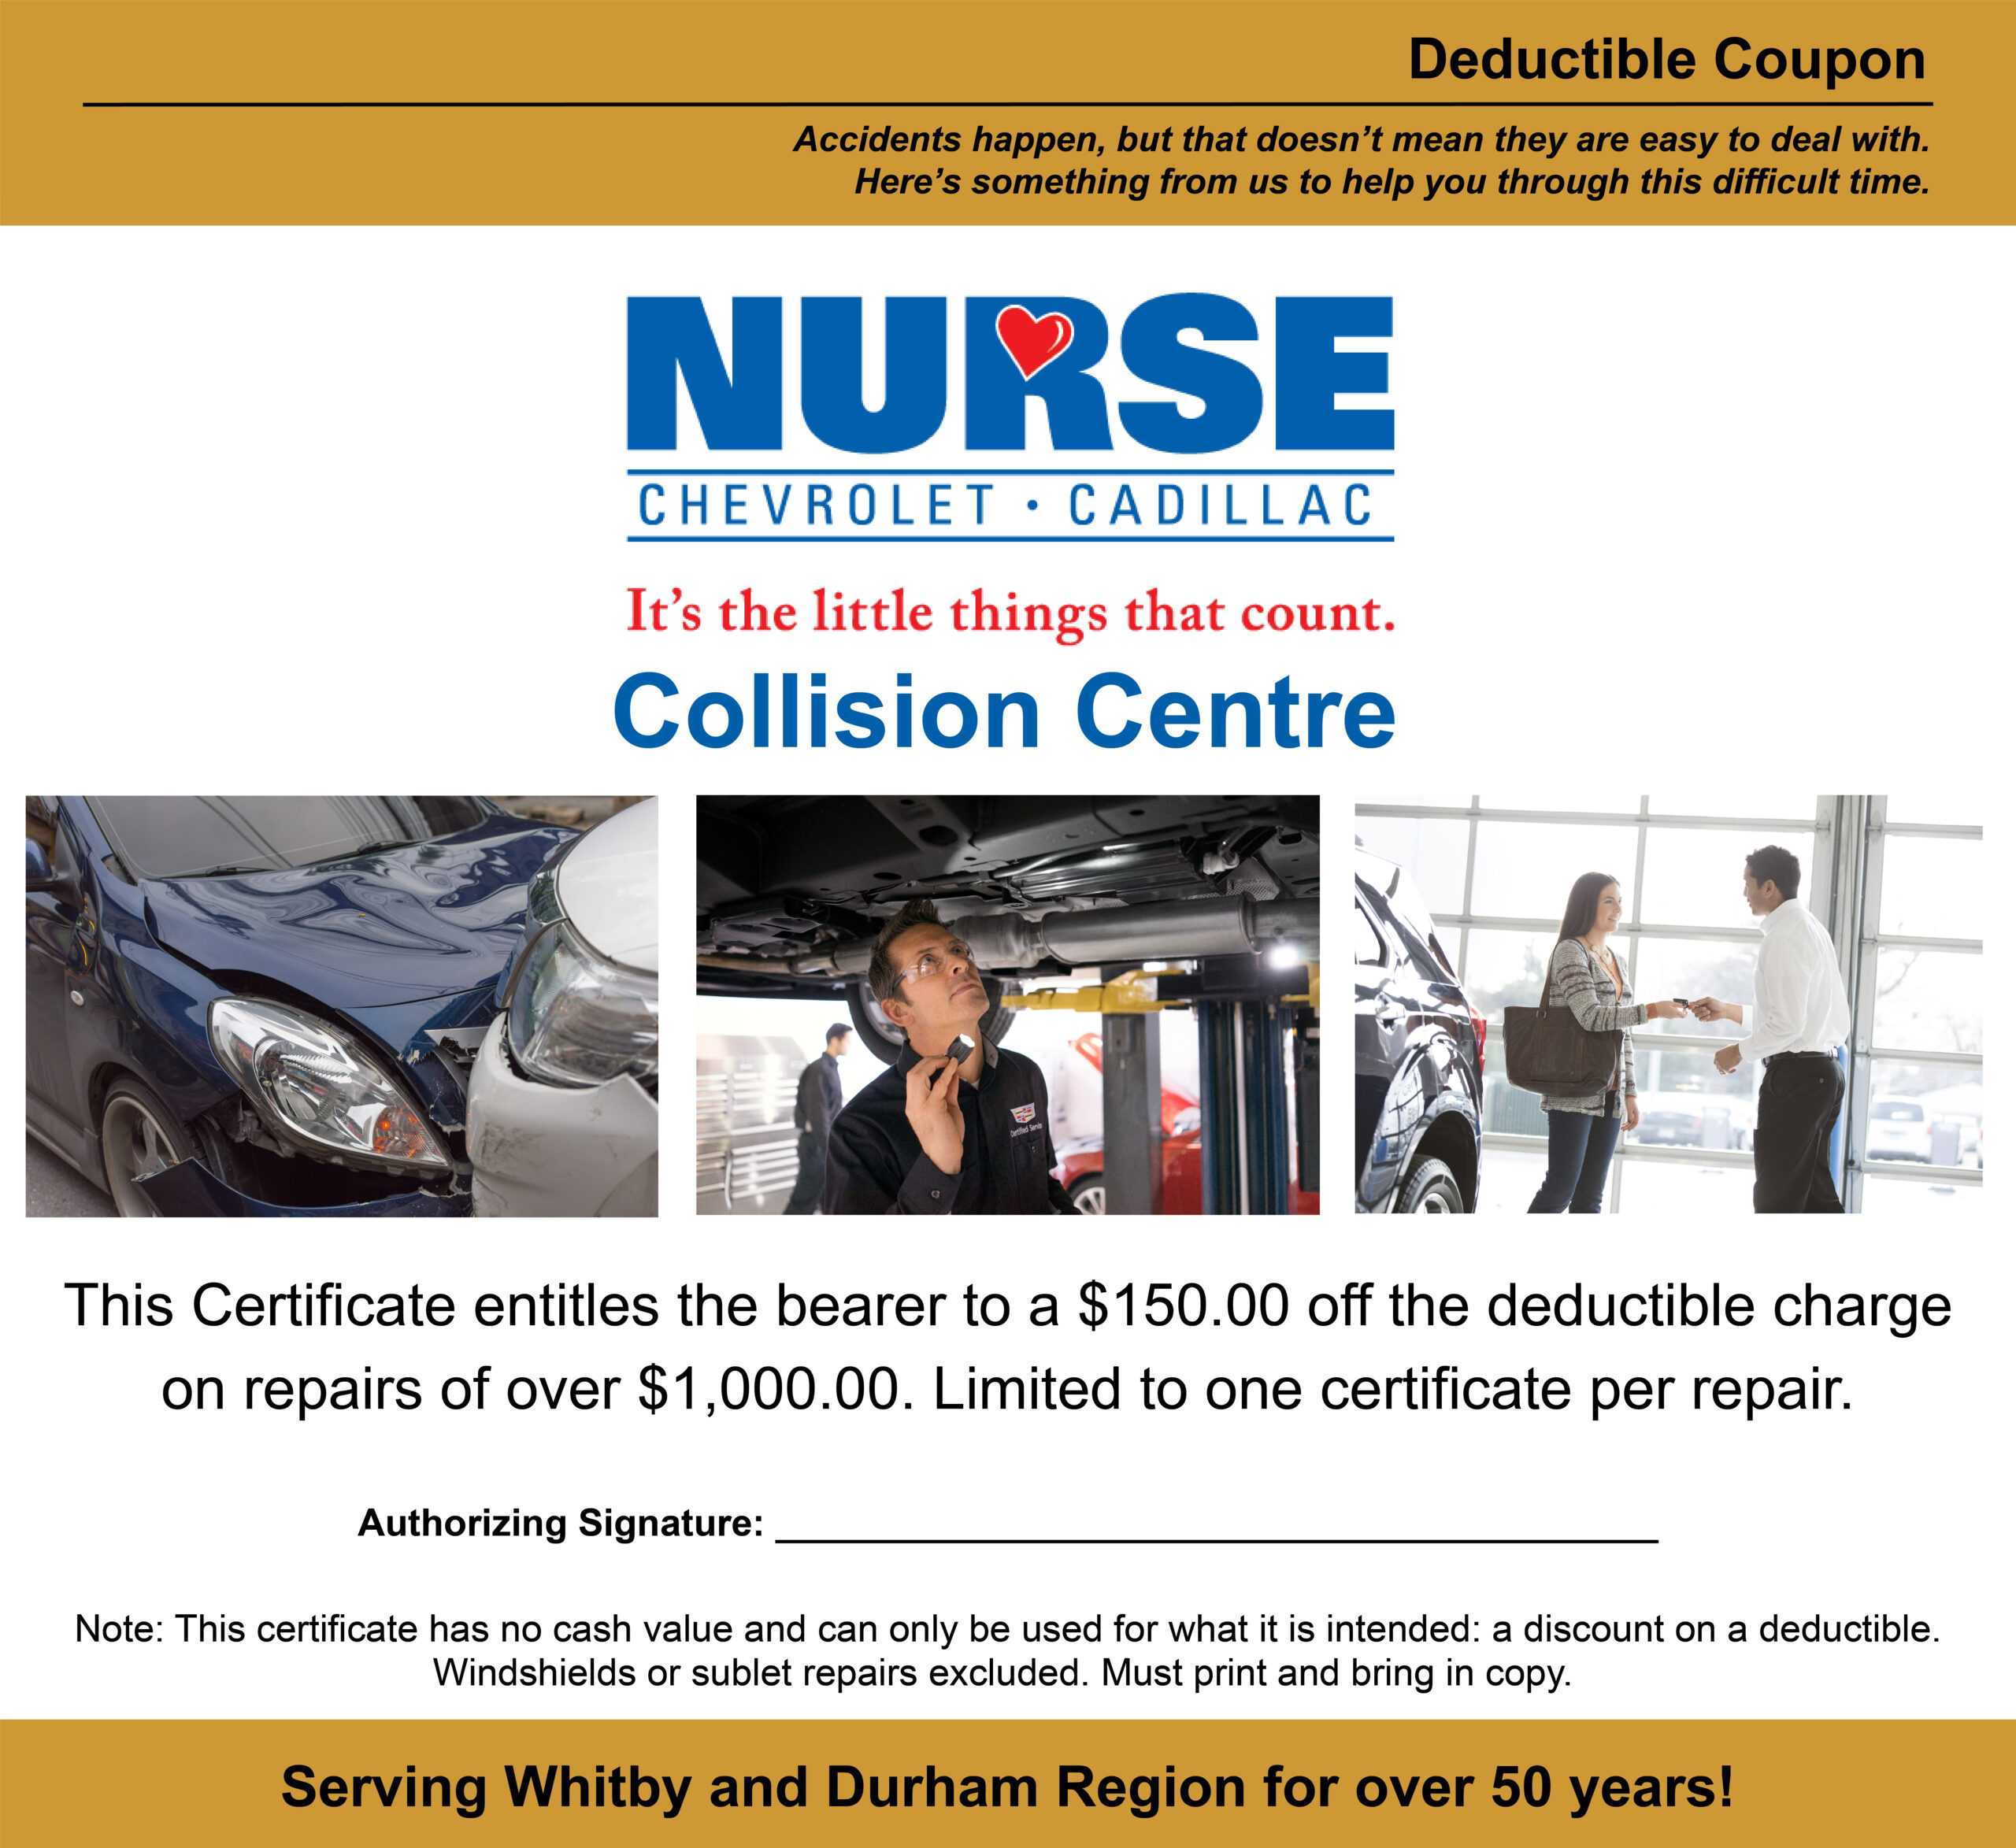 Exclusive Offers | Nurse Chevrolet Cadillac Throughout This Certificate Entitles The Bearer To Template